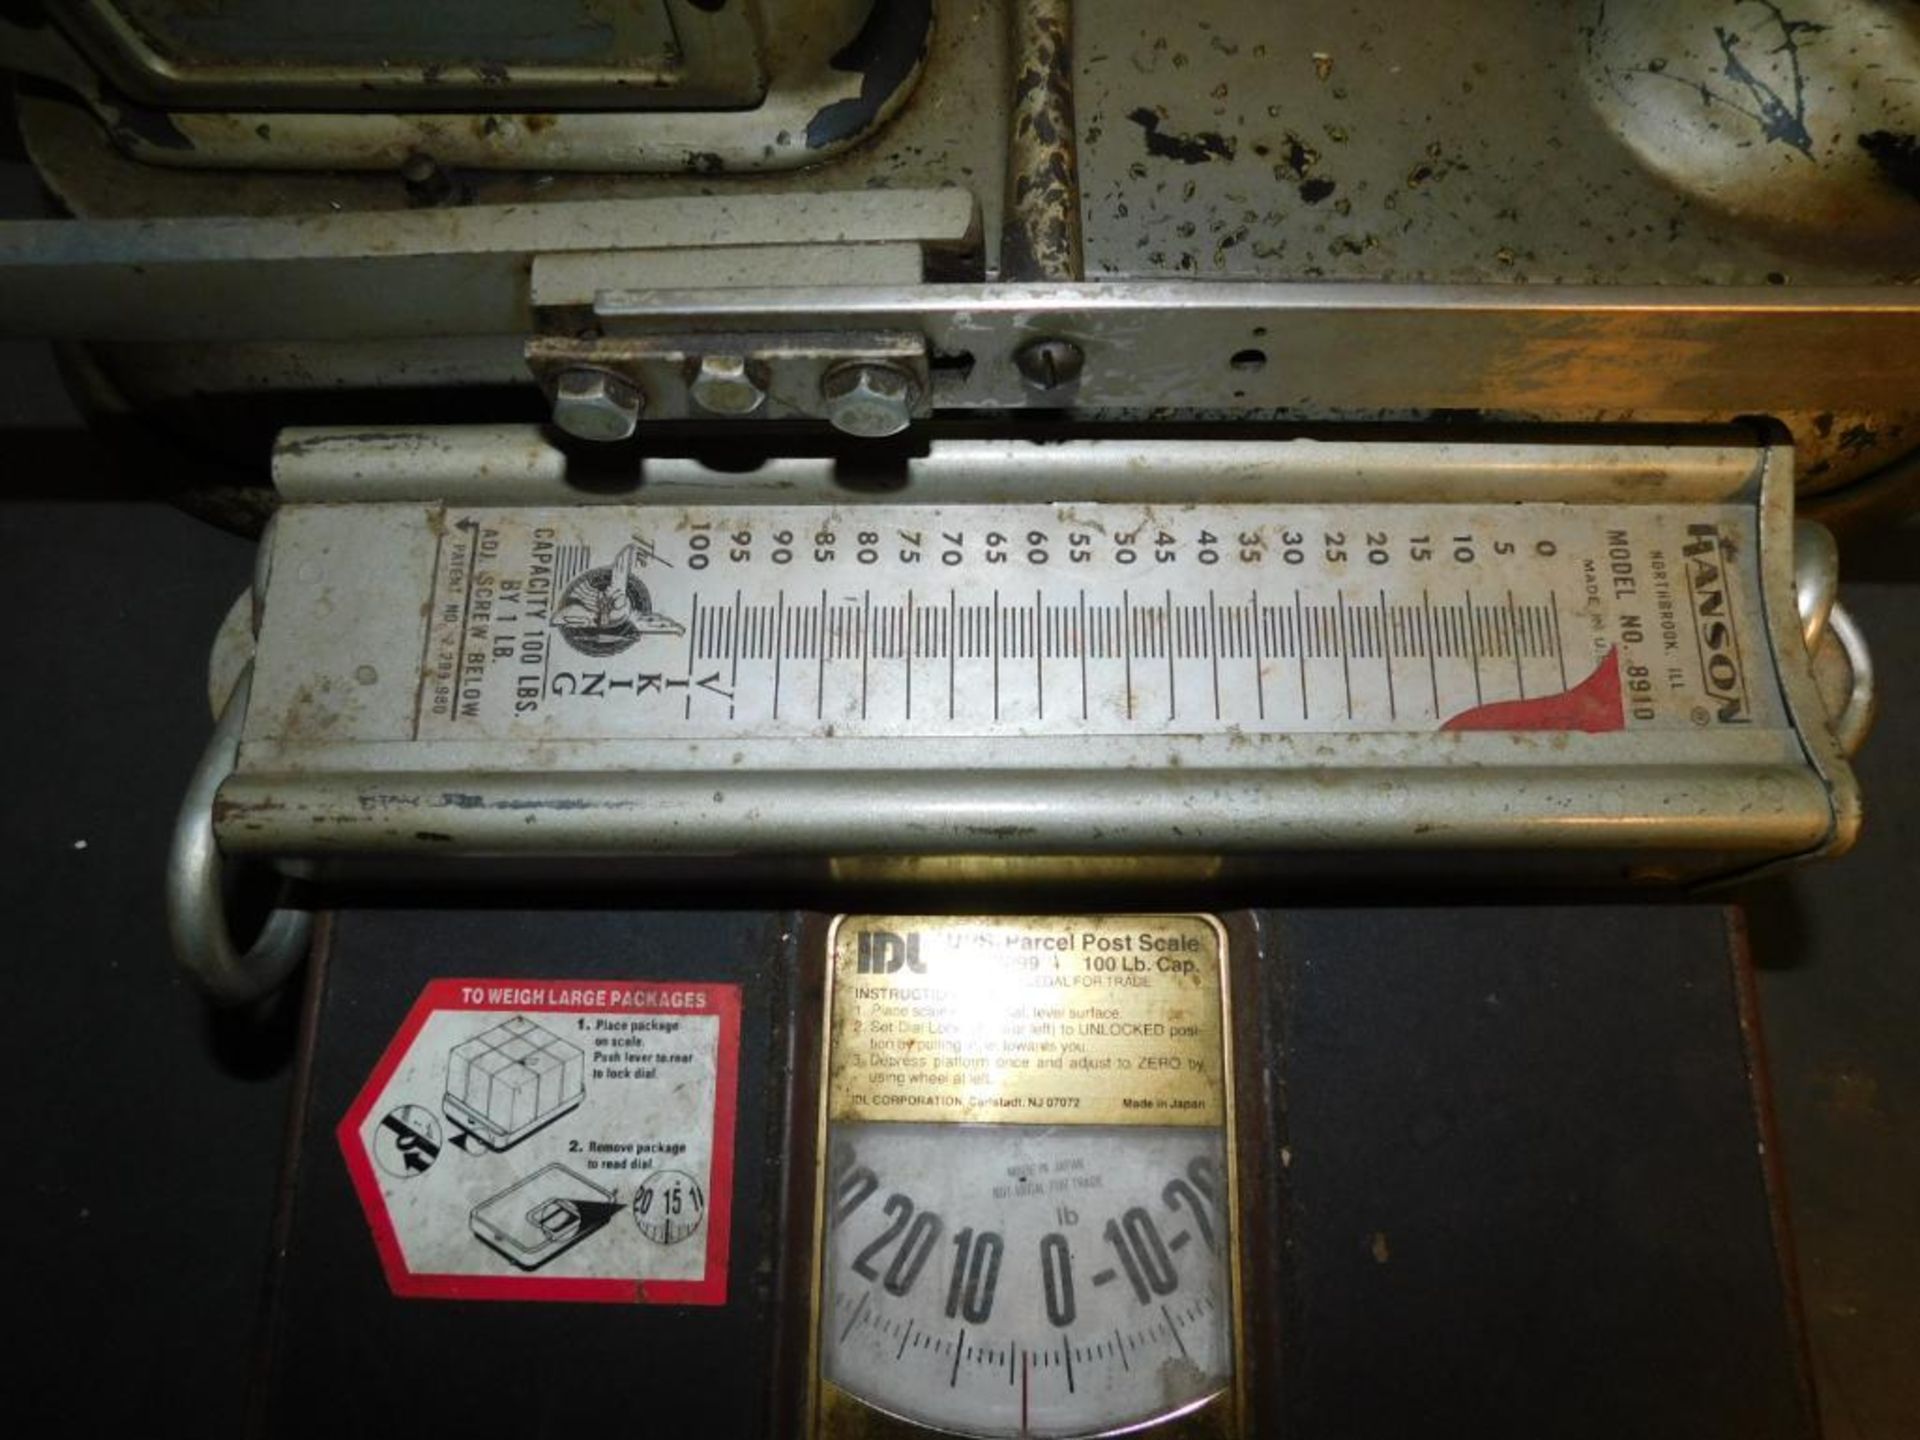 LOT: Vintage Counting Scale, Viking 100 Lb. Cap. Hanging Scale, 100 Lb. Cap. Parcel Post Scale - Image 7 of 7